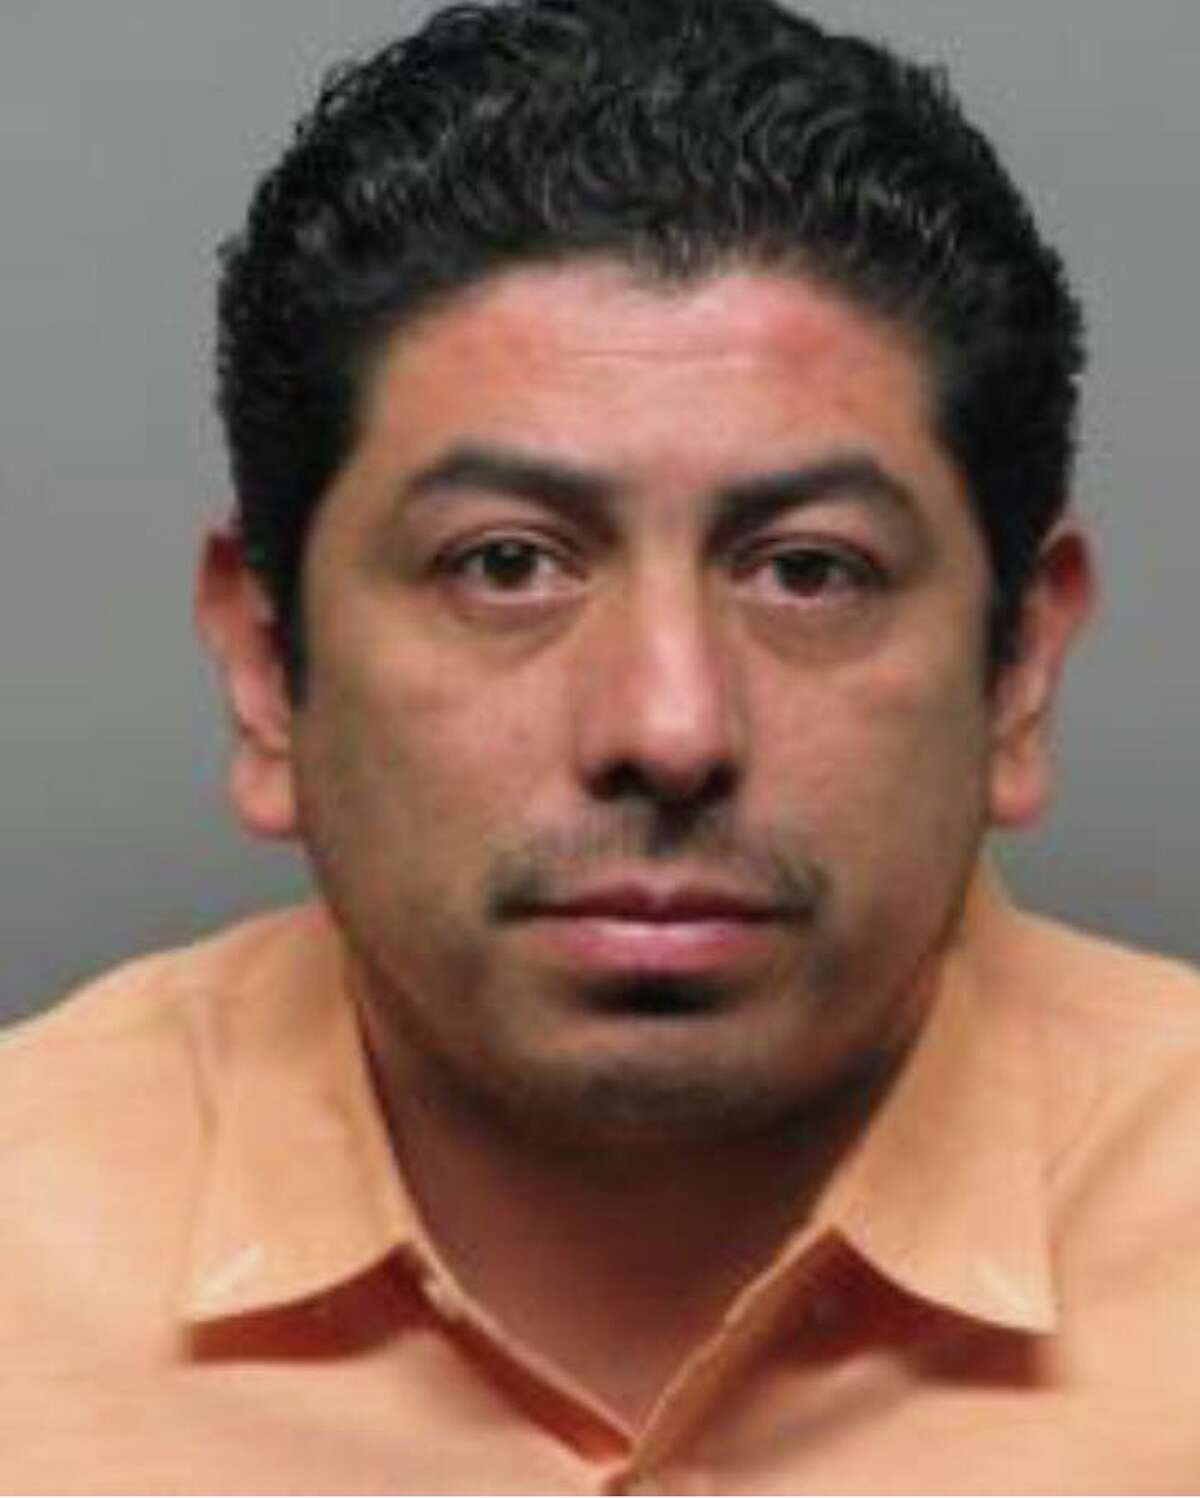 Fernando Maldonado, a 32-year-old Concord resident, was charged Monday with 12 counts of lewd acts on a minor, 10 counts of unlawful sexual intercourse with a minor and one count of sodomy of a minor.